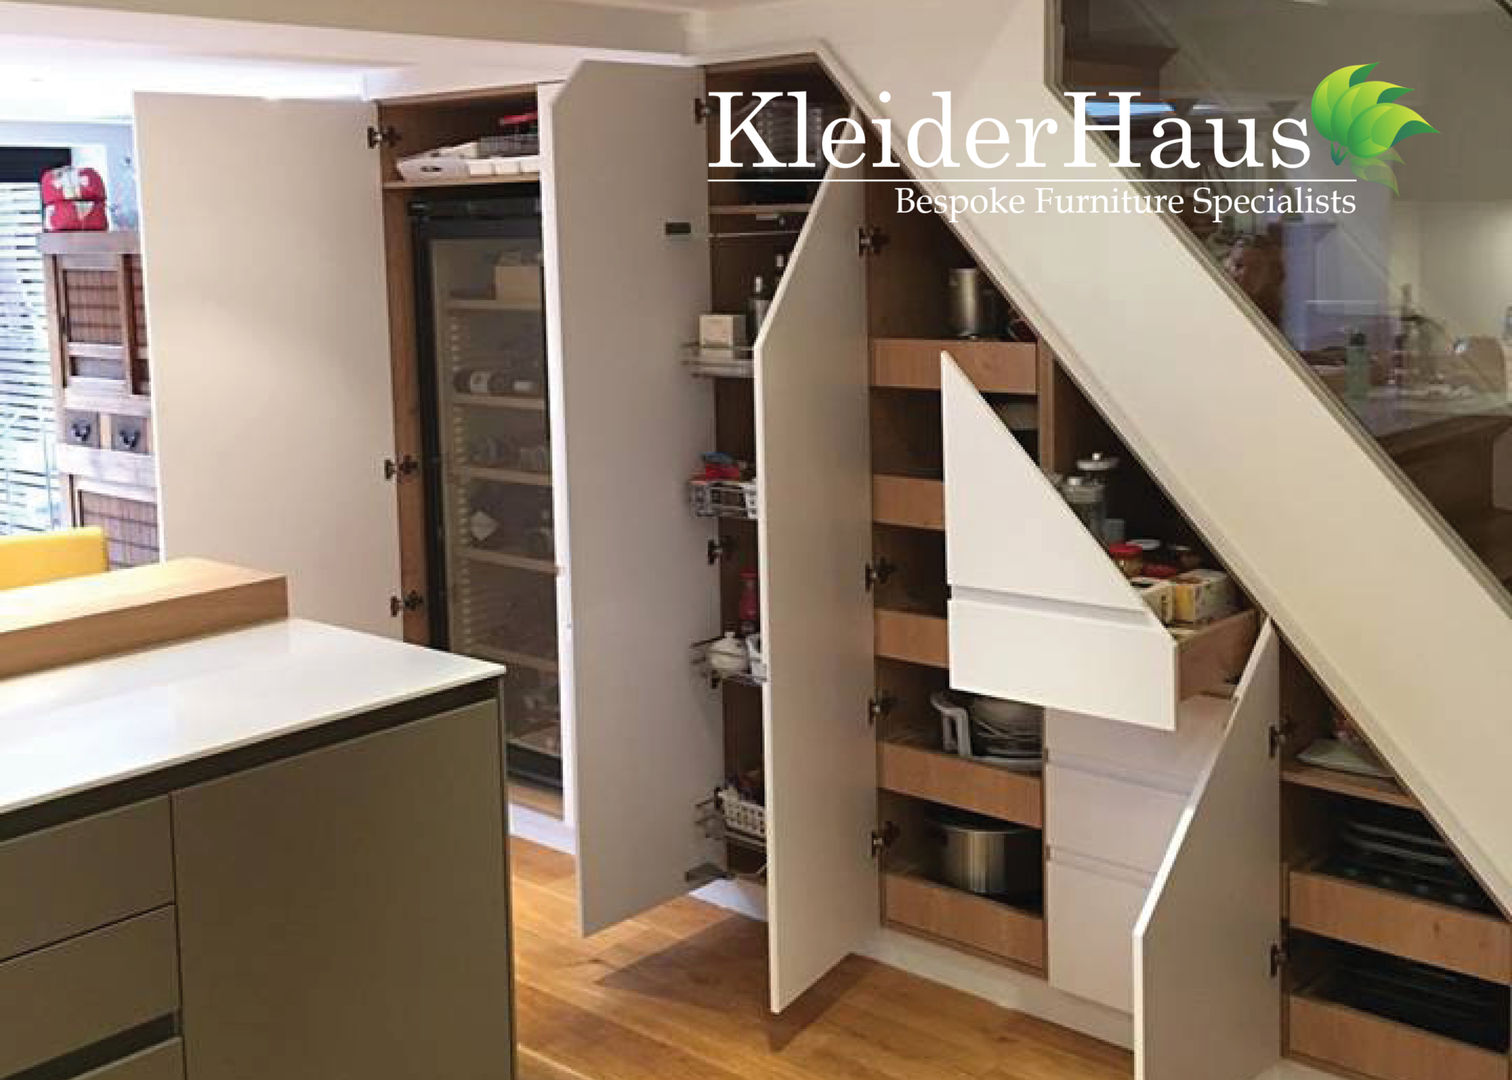 Kitchen Understairs unit - Finally project Completed by Kleiderhaus Kleiderhaus ltd Cocinas de estilo moderno understairs,kitchen understairs,kitchen,fitted kitchen,utility,made to measure,awkward space,bespoke kitchen,joinery,kitchen remodeling,custom made,under-stairs